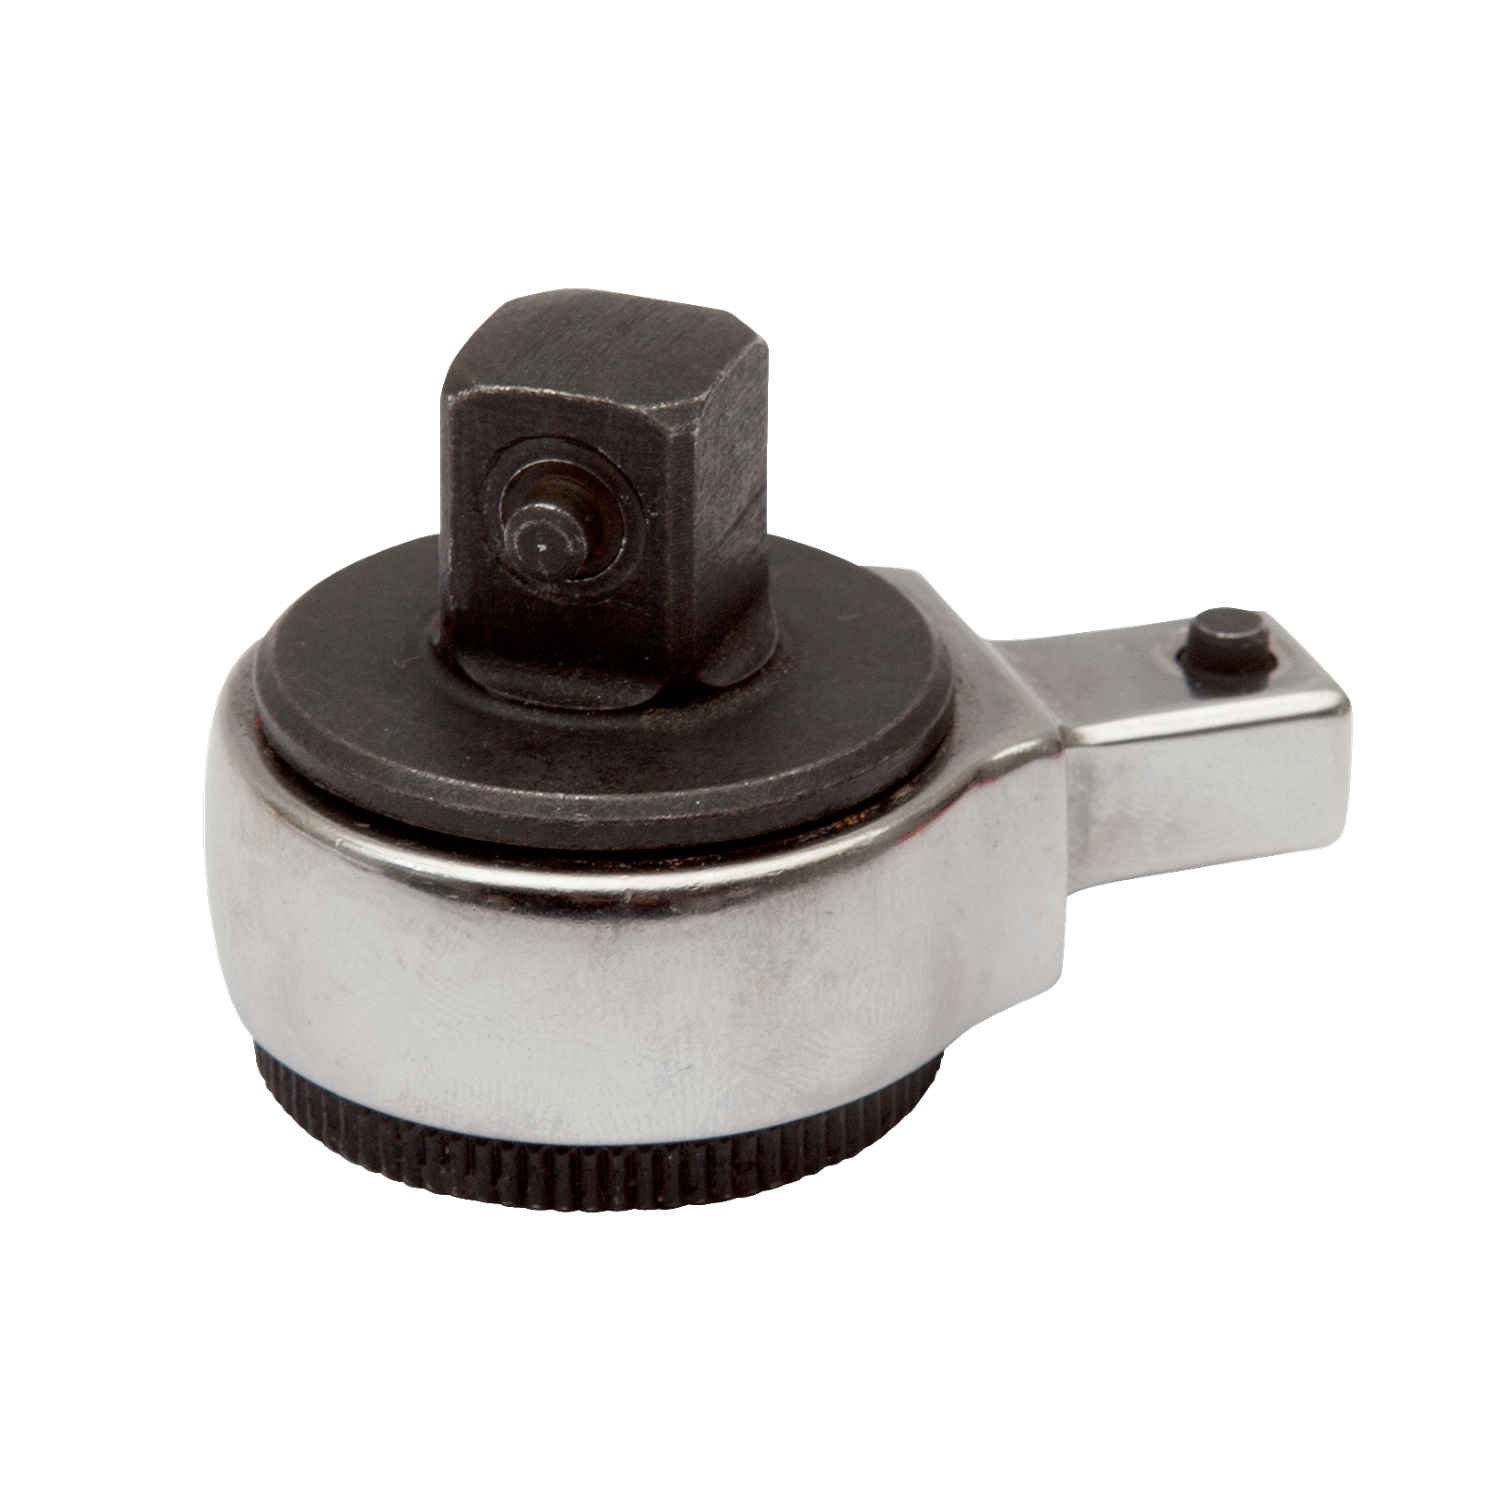 BAHCO TAH7452-2 Reversible Ratchet Head Locking Device 9x12mm - Premium Ratchet Head from BAHCO - Shop now at Yew Aik.